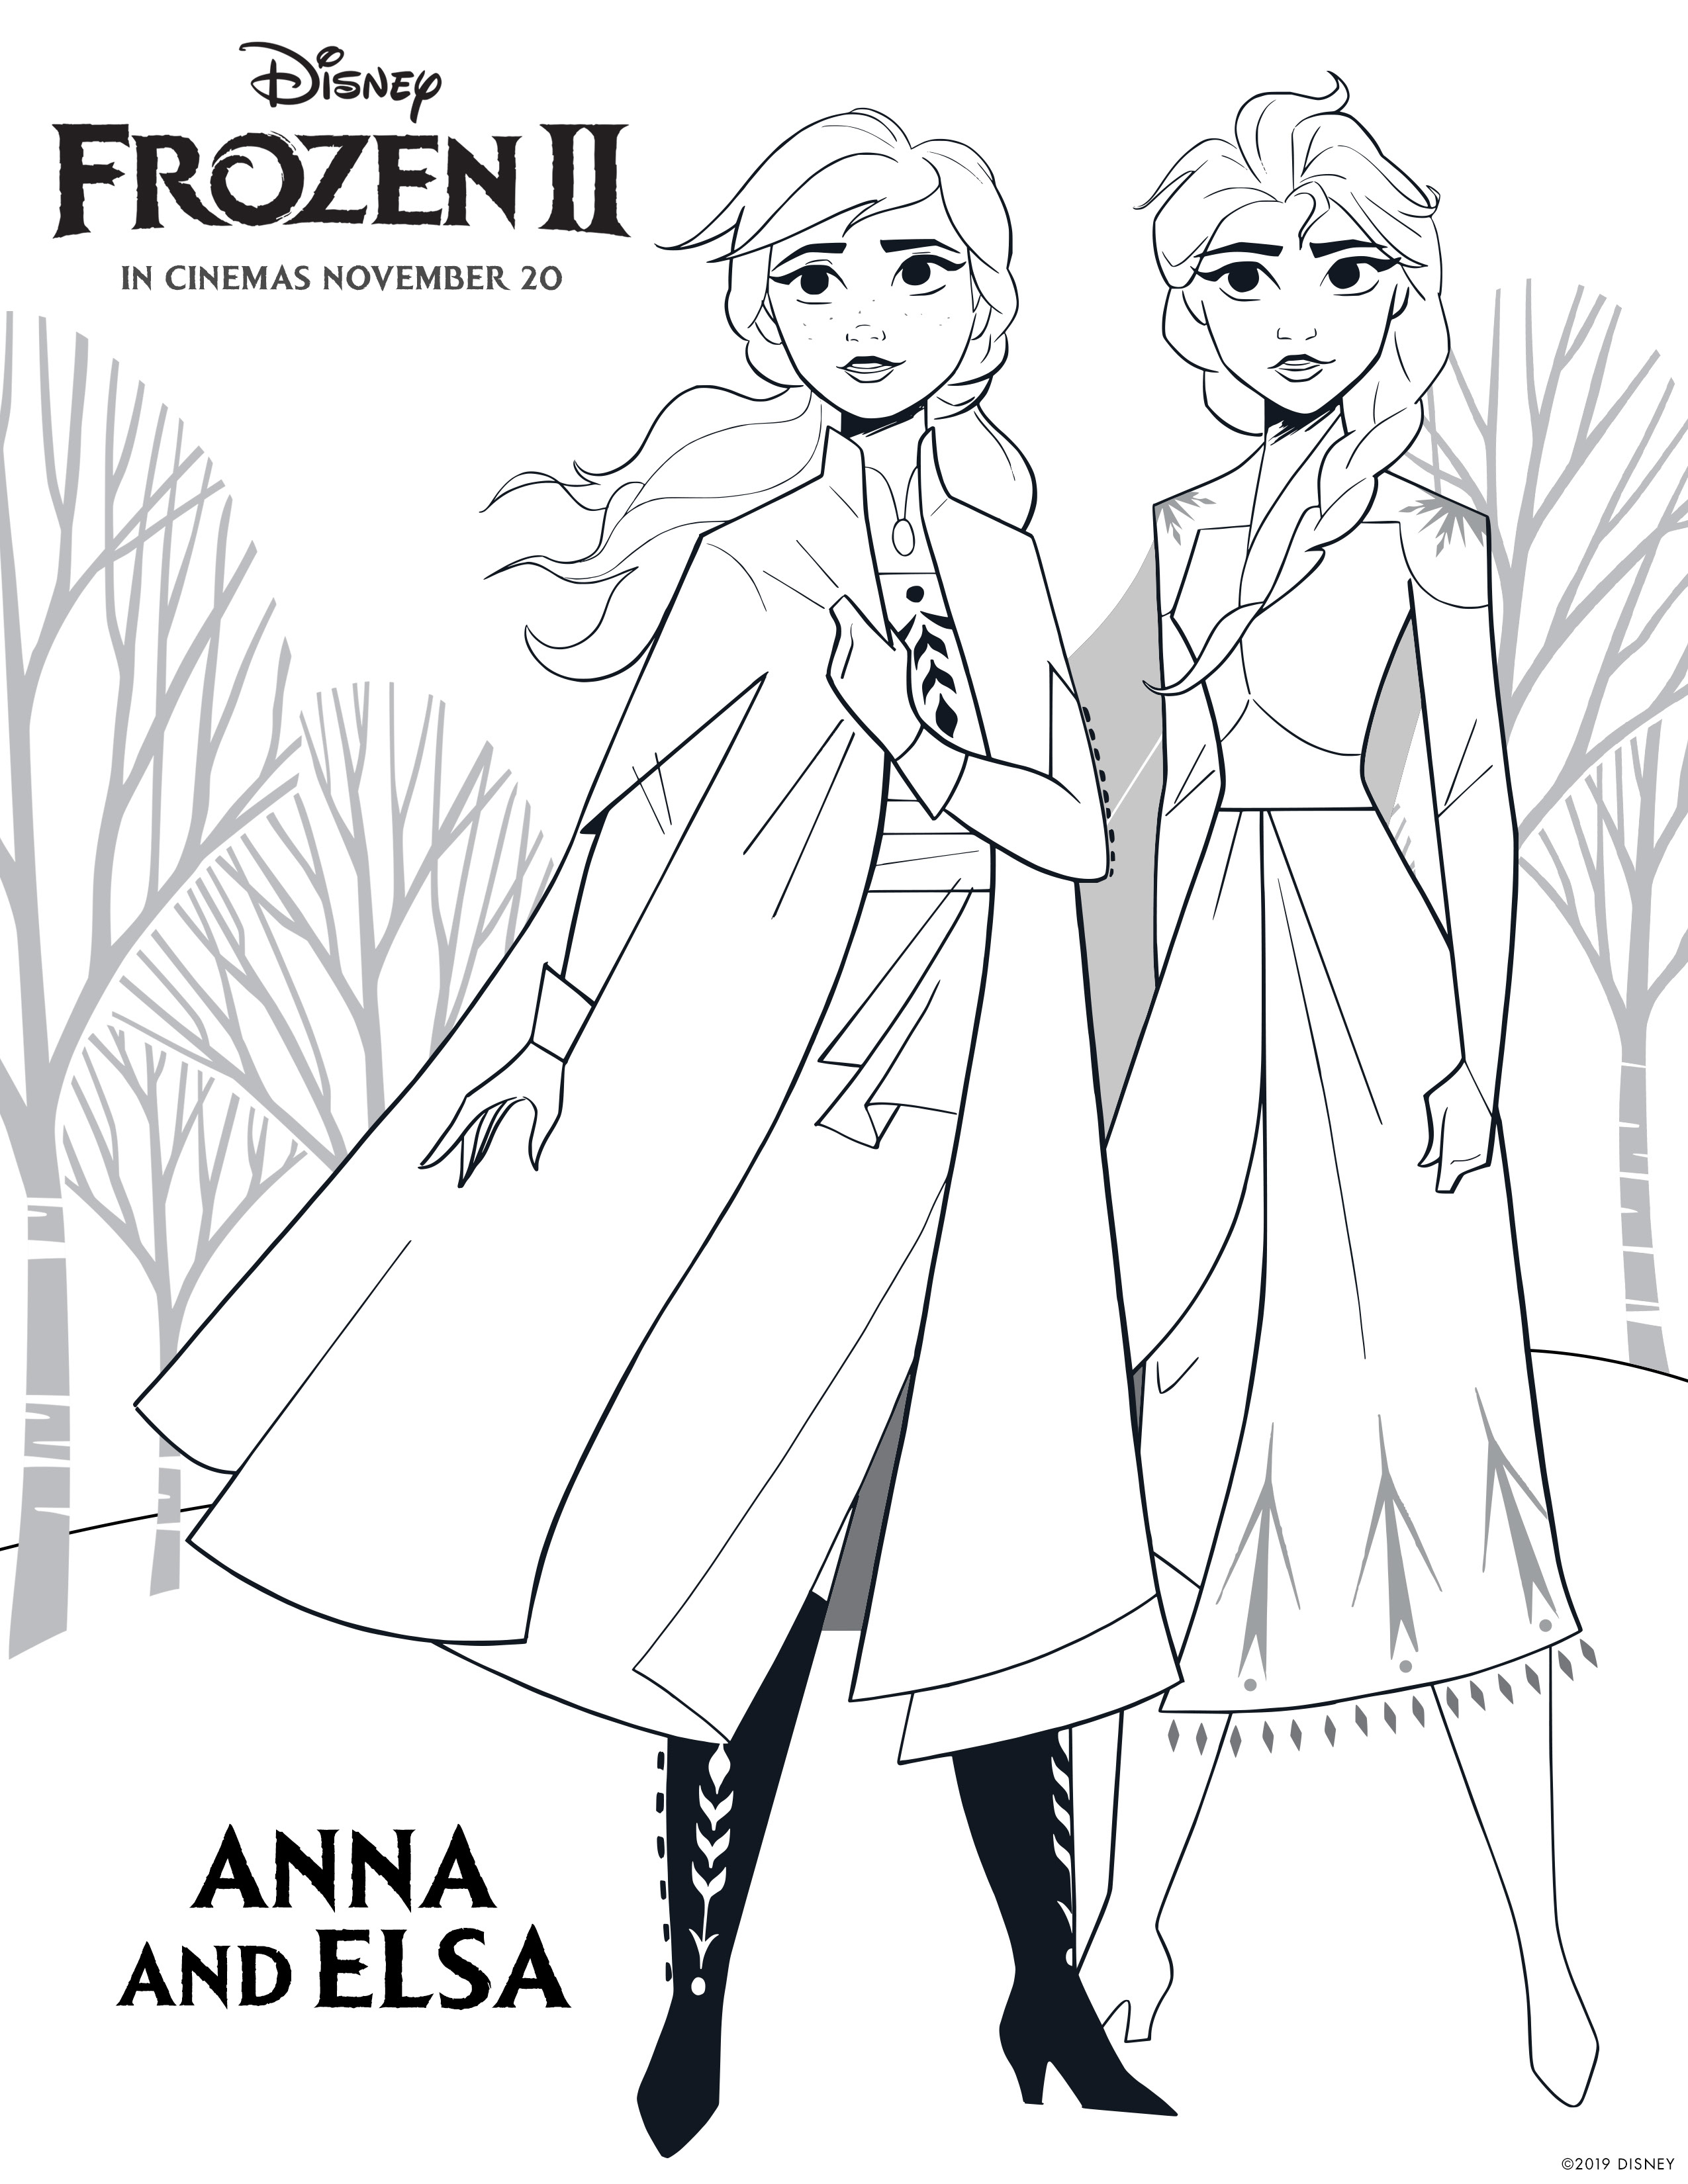 Frozen 2 free coloring pages with Elsa, Anna, Olaf, Kristoff, Bruni and